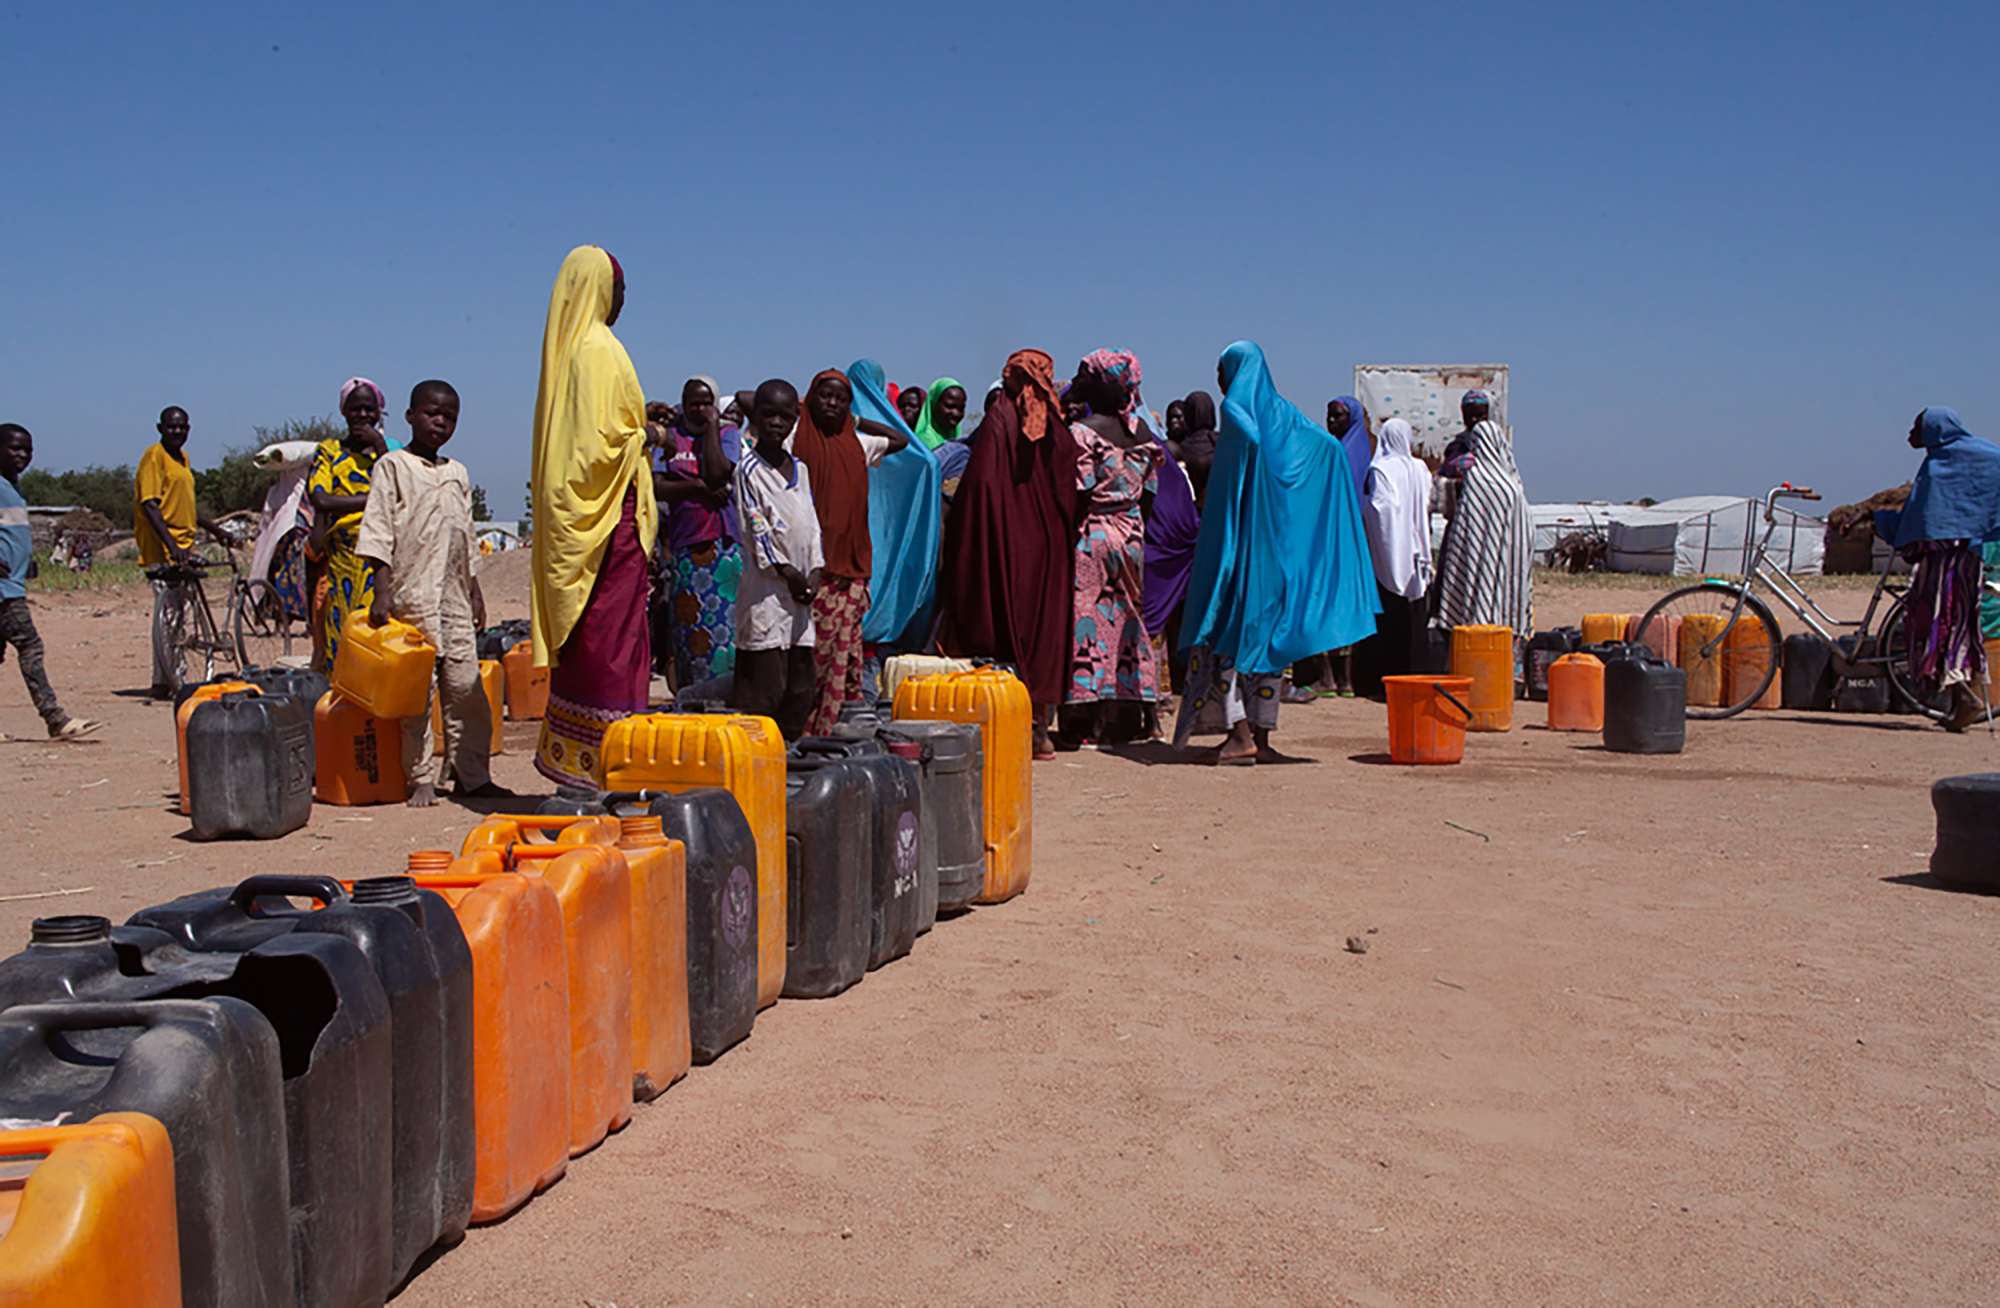 Women queue up at a borehole to collect water in Gwoza, Borno state, Nigeria. © Scott Hamilton/MSF